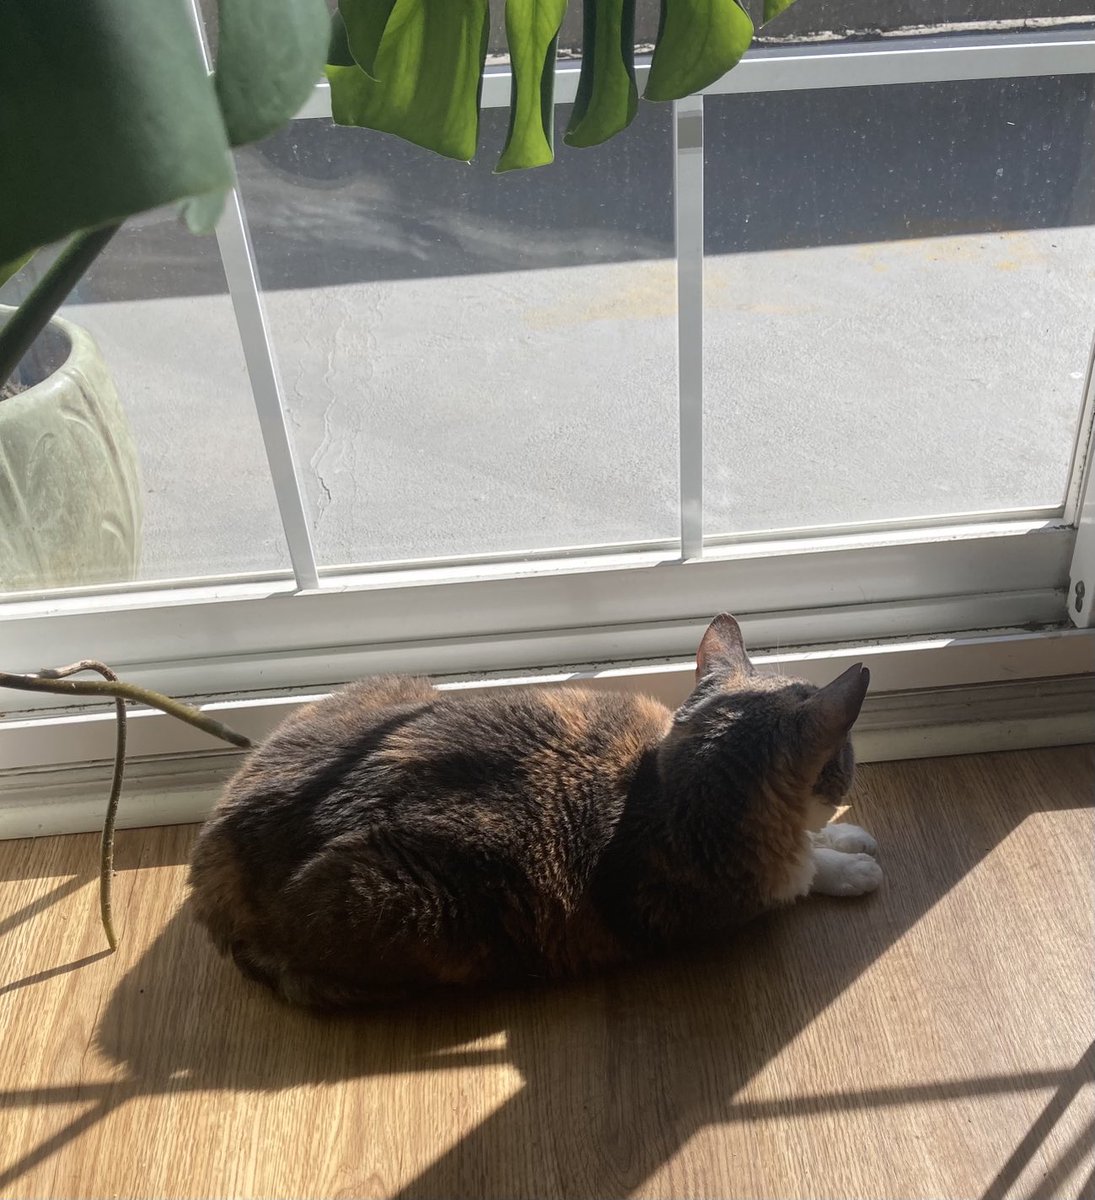 Mocha found a sun puddle and enjoying herself. She was screaming all night, which makes me really worried #catsoftwitter #mochatalker #teamMocha